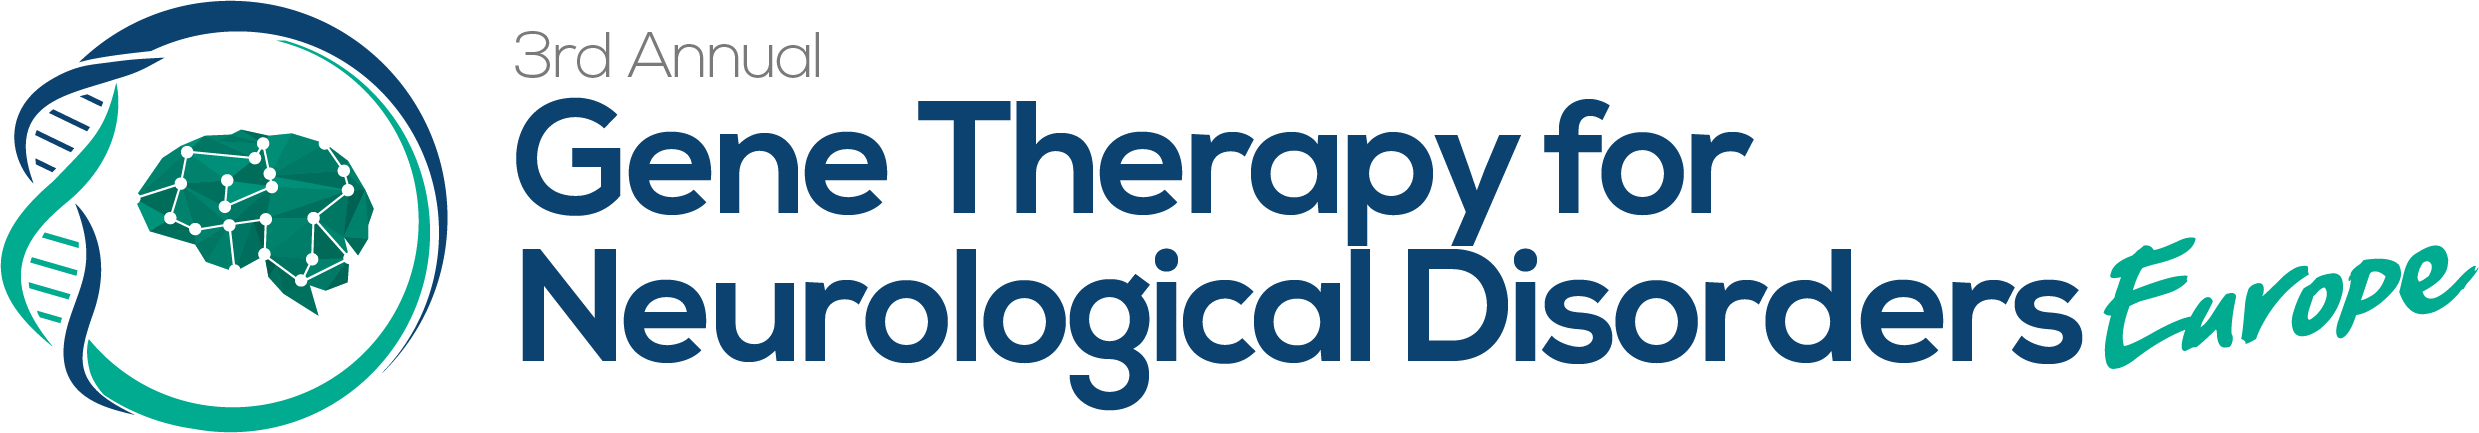 4959_Gene_Therapy_for_Neurological_Disorders_Europe_Logo 3rd Annual